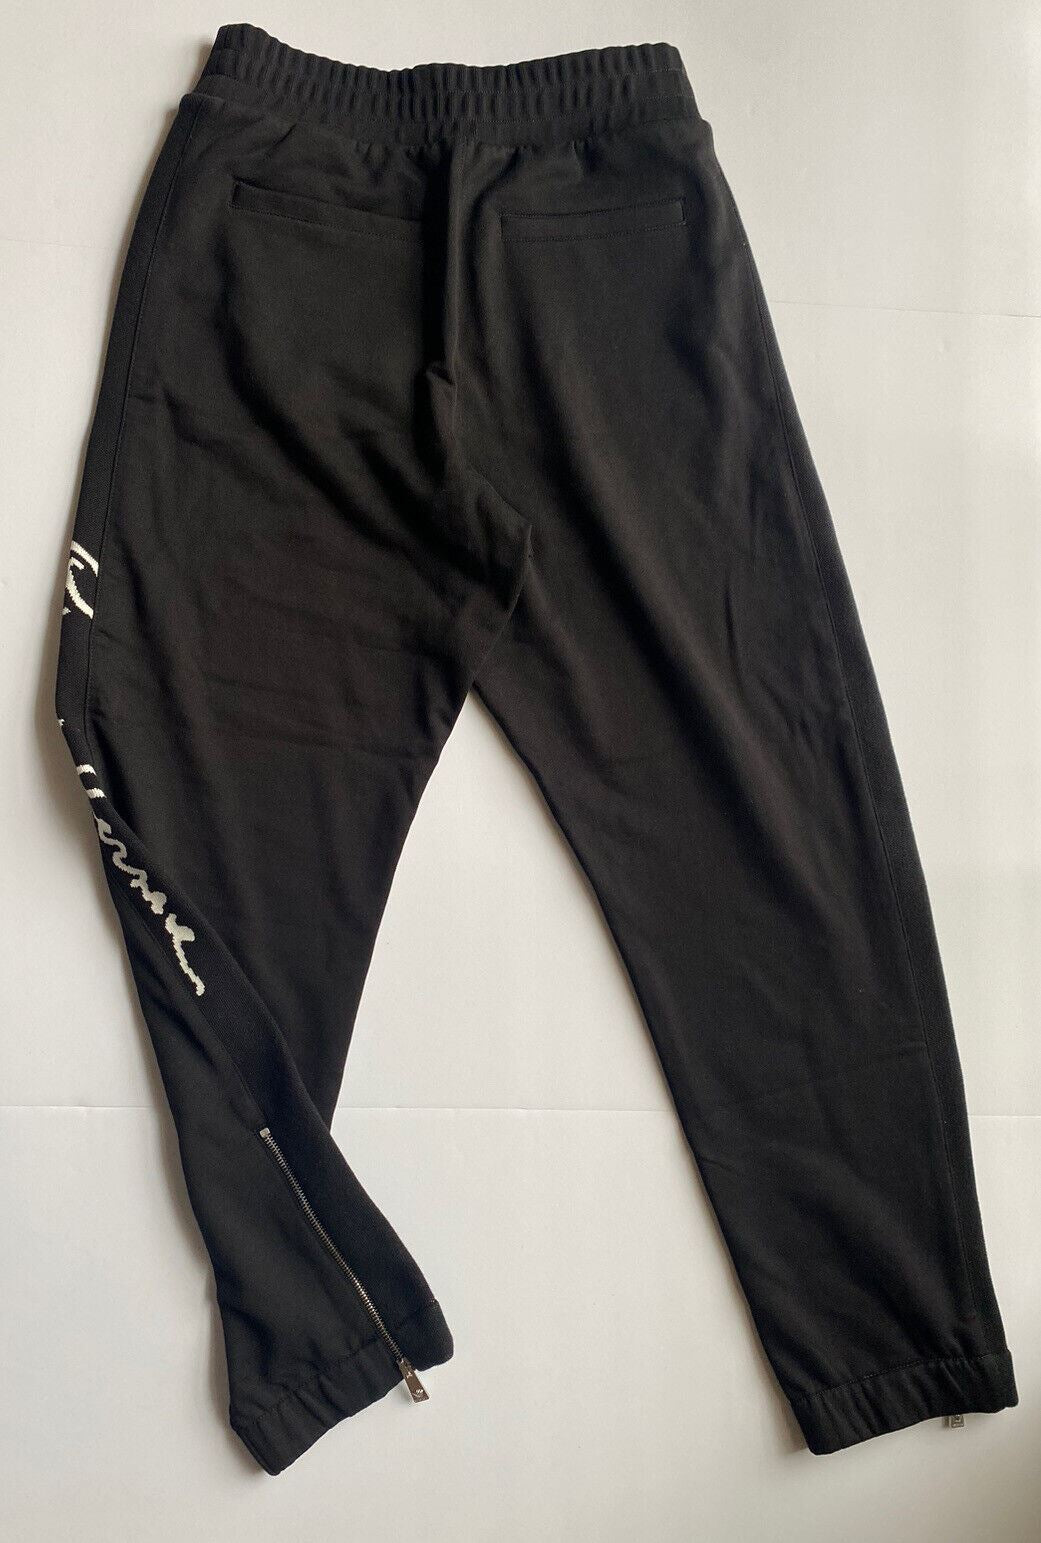 NWT $850 Versace Men's Black Mitchel Fit Pants Size Medium Made in Italy A86887